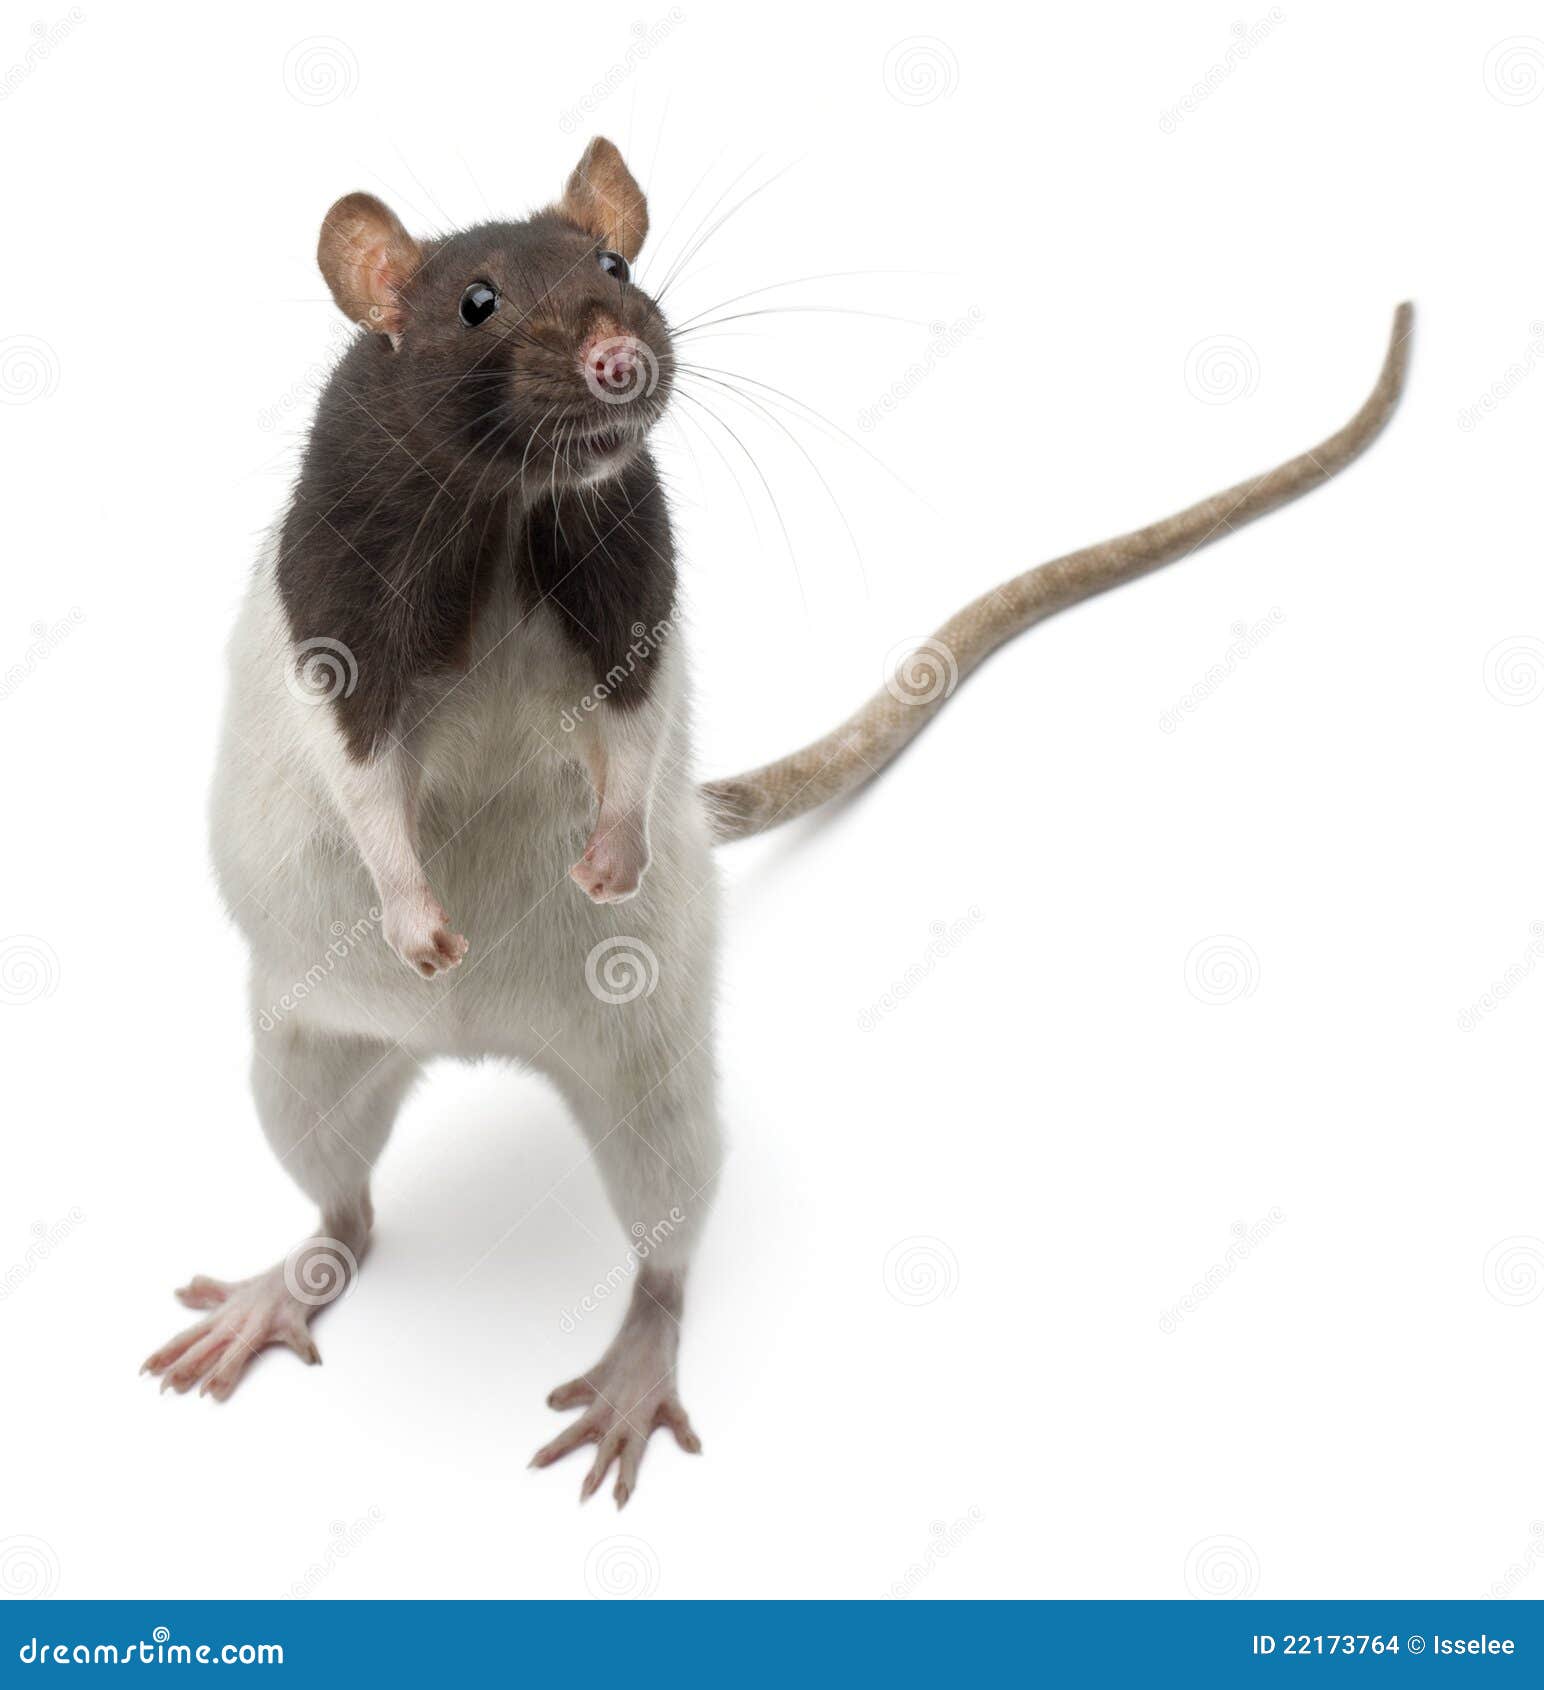 fancy rat standing up front white background 22173764